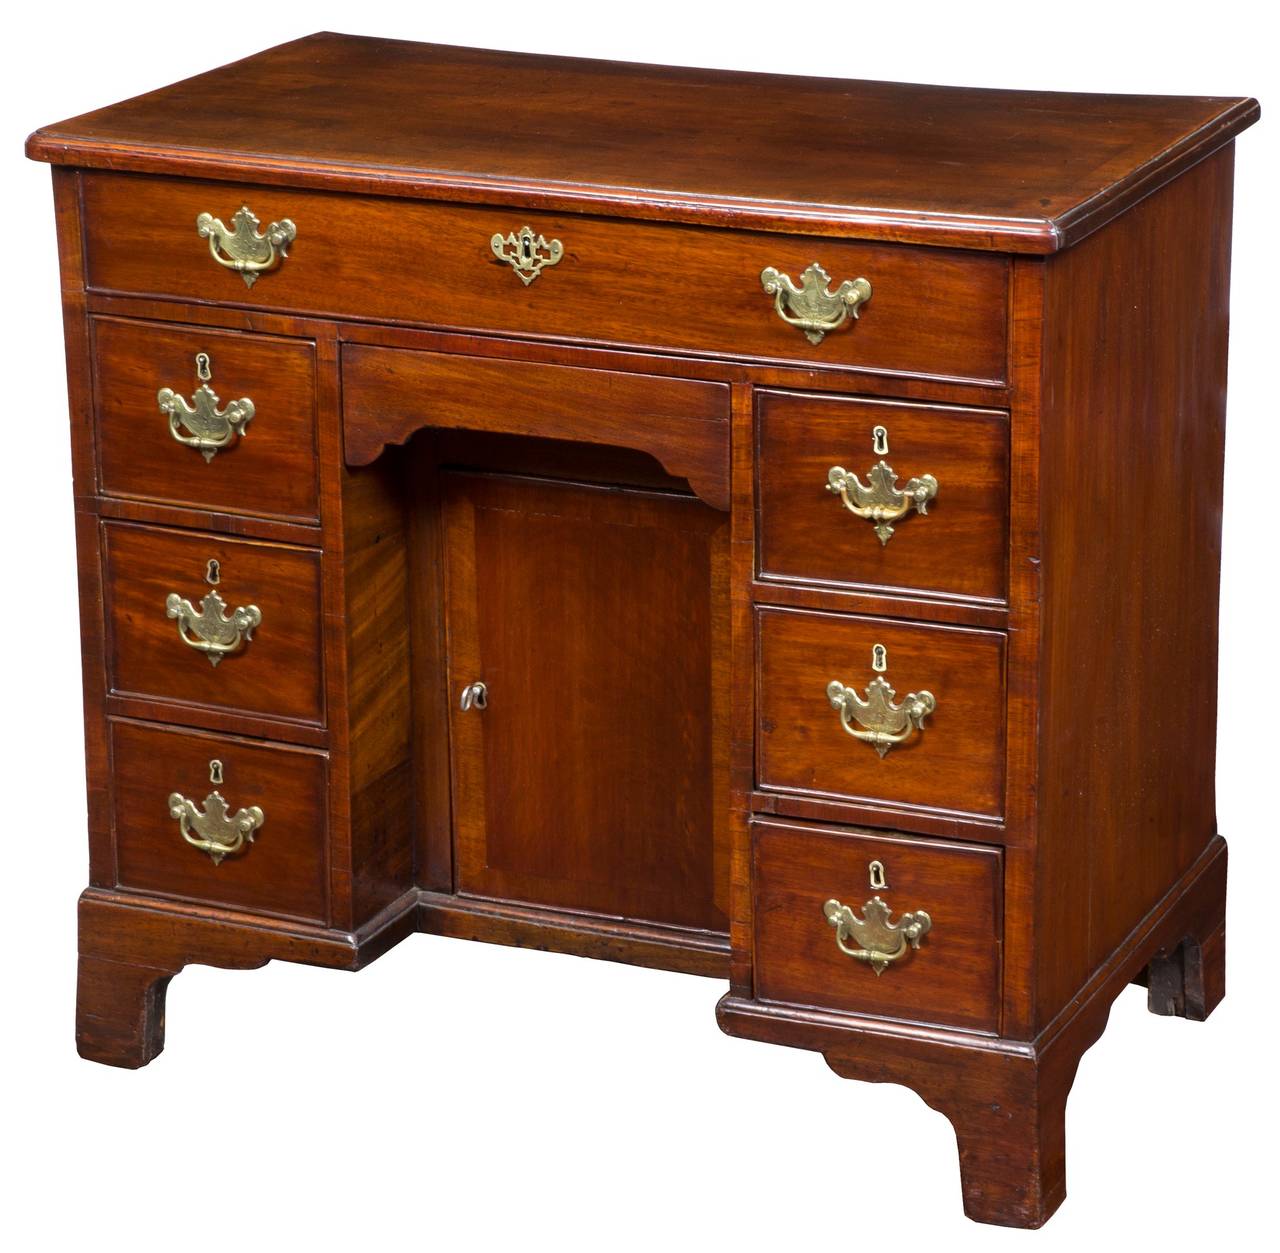 This mahogany kneehole desk is like many of those that were produced in its era. Generally, these are reasonably priced, although many have major elements that have been replaced over the years, e.g. bracket feet and especially the tops. This desk